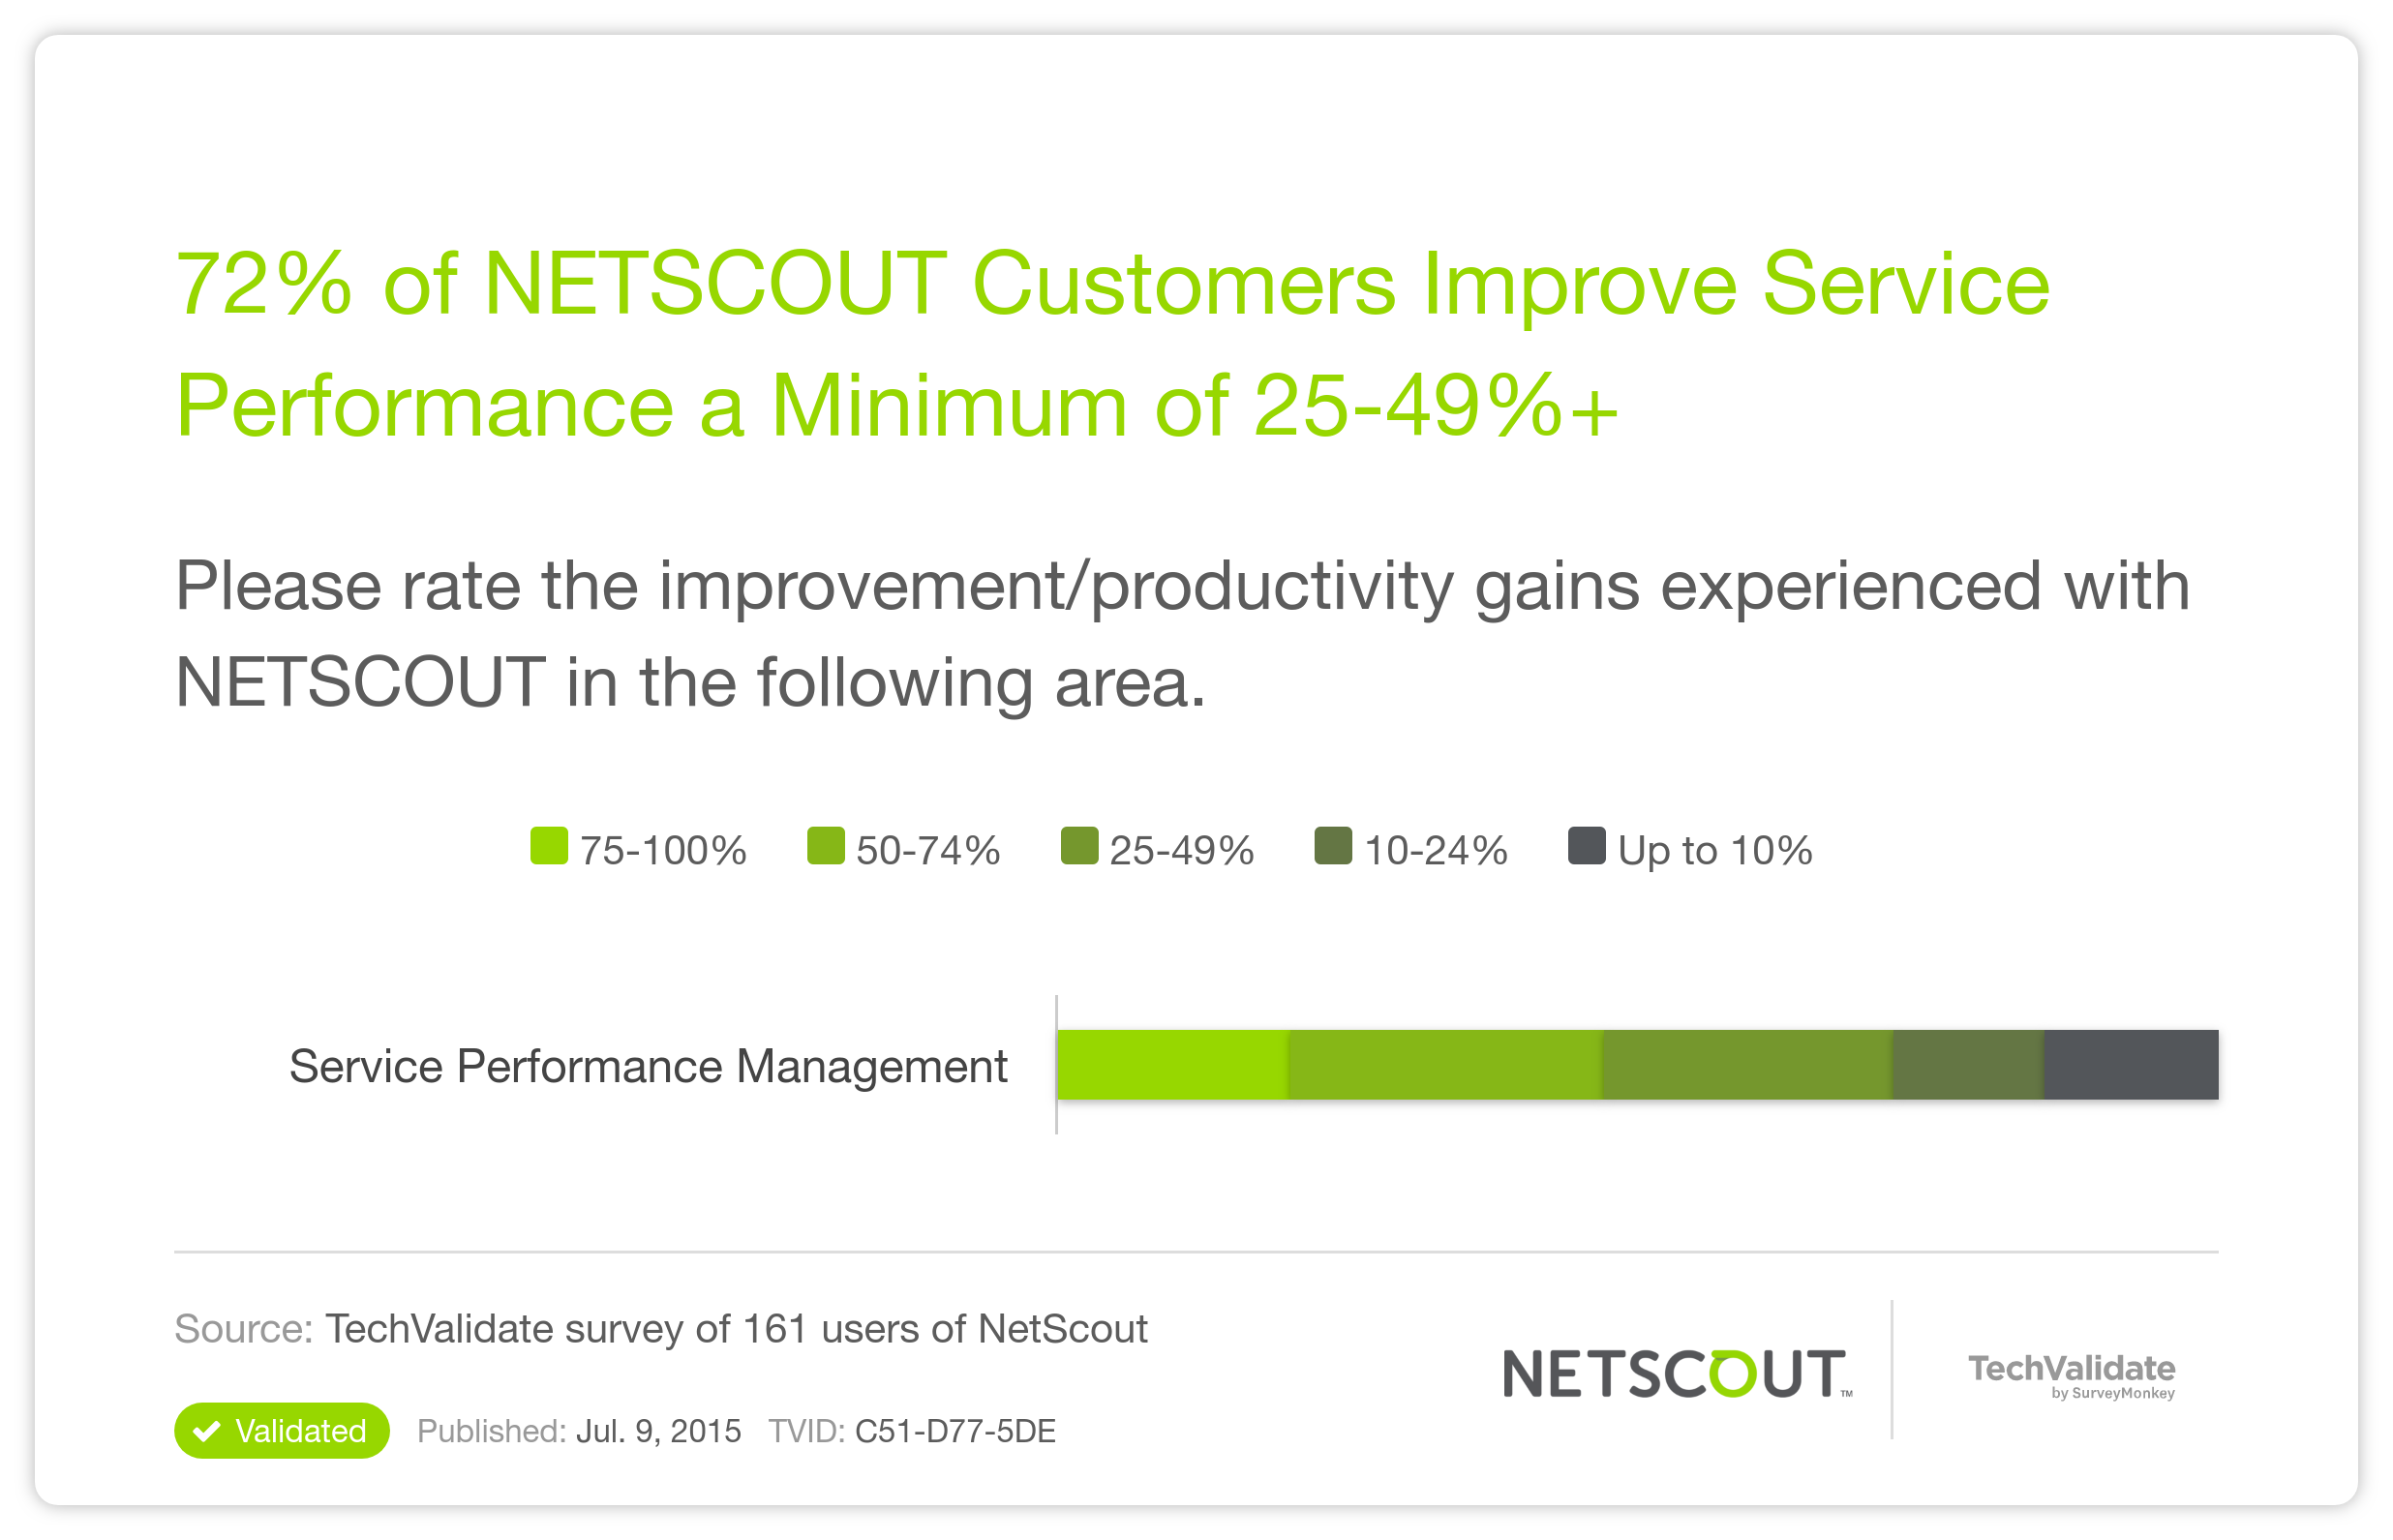 72% of NETSCOUT Customers Improve Service Performance a Minimum of 25-49%+